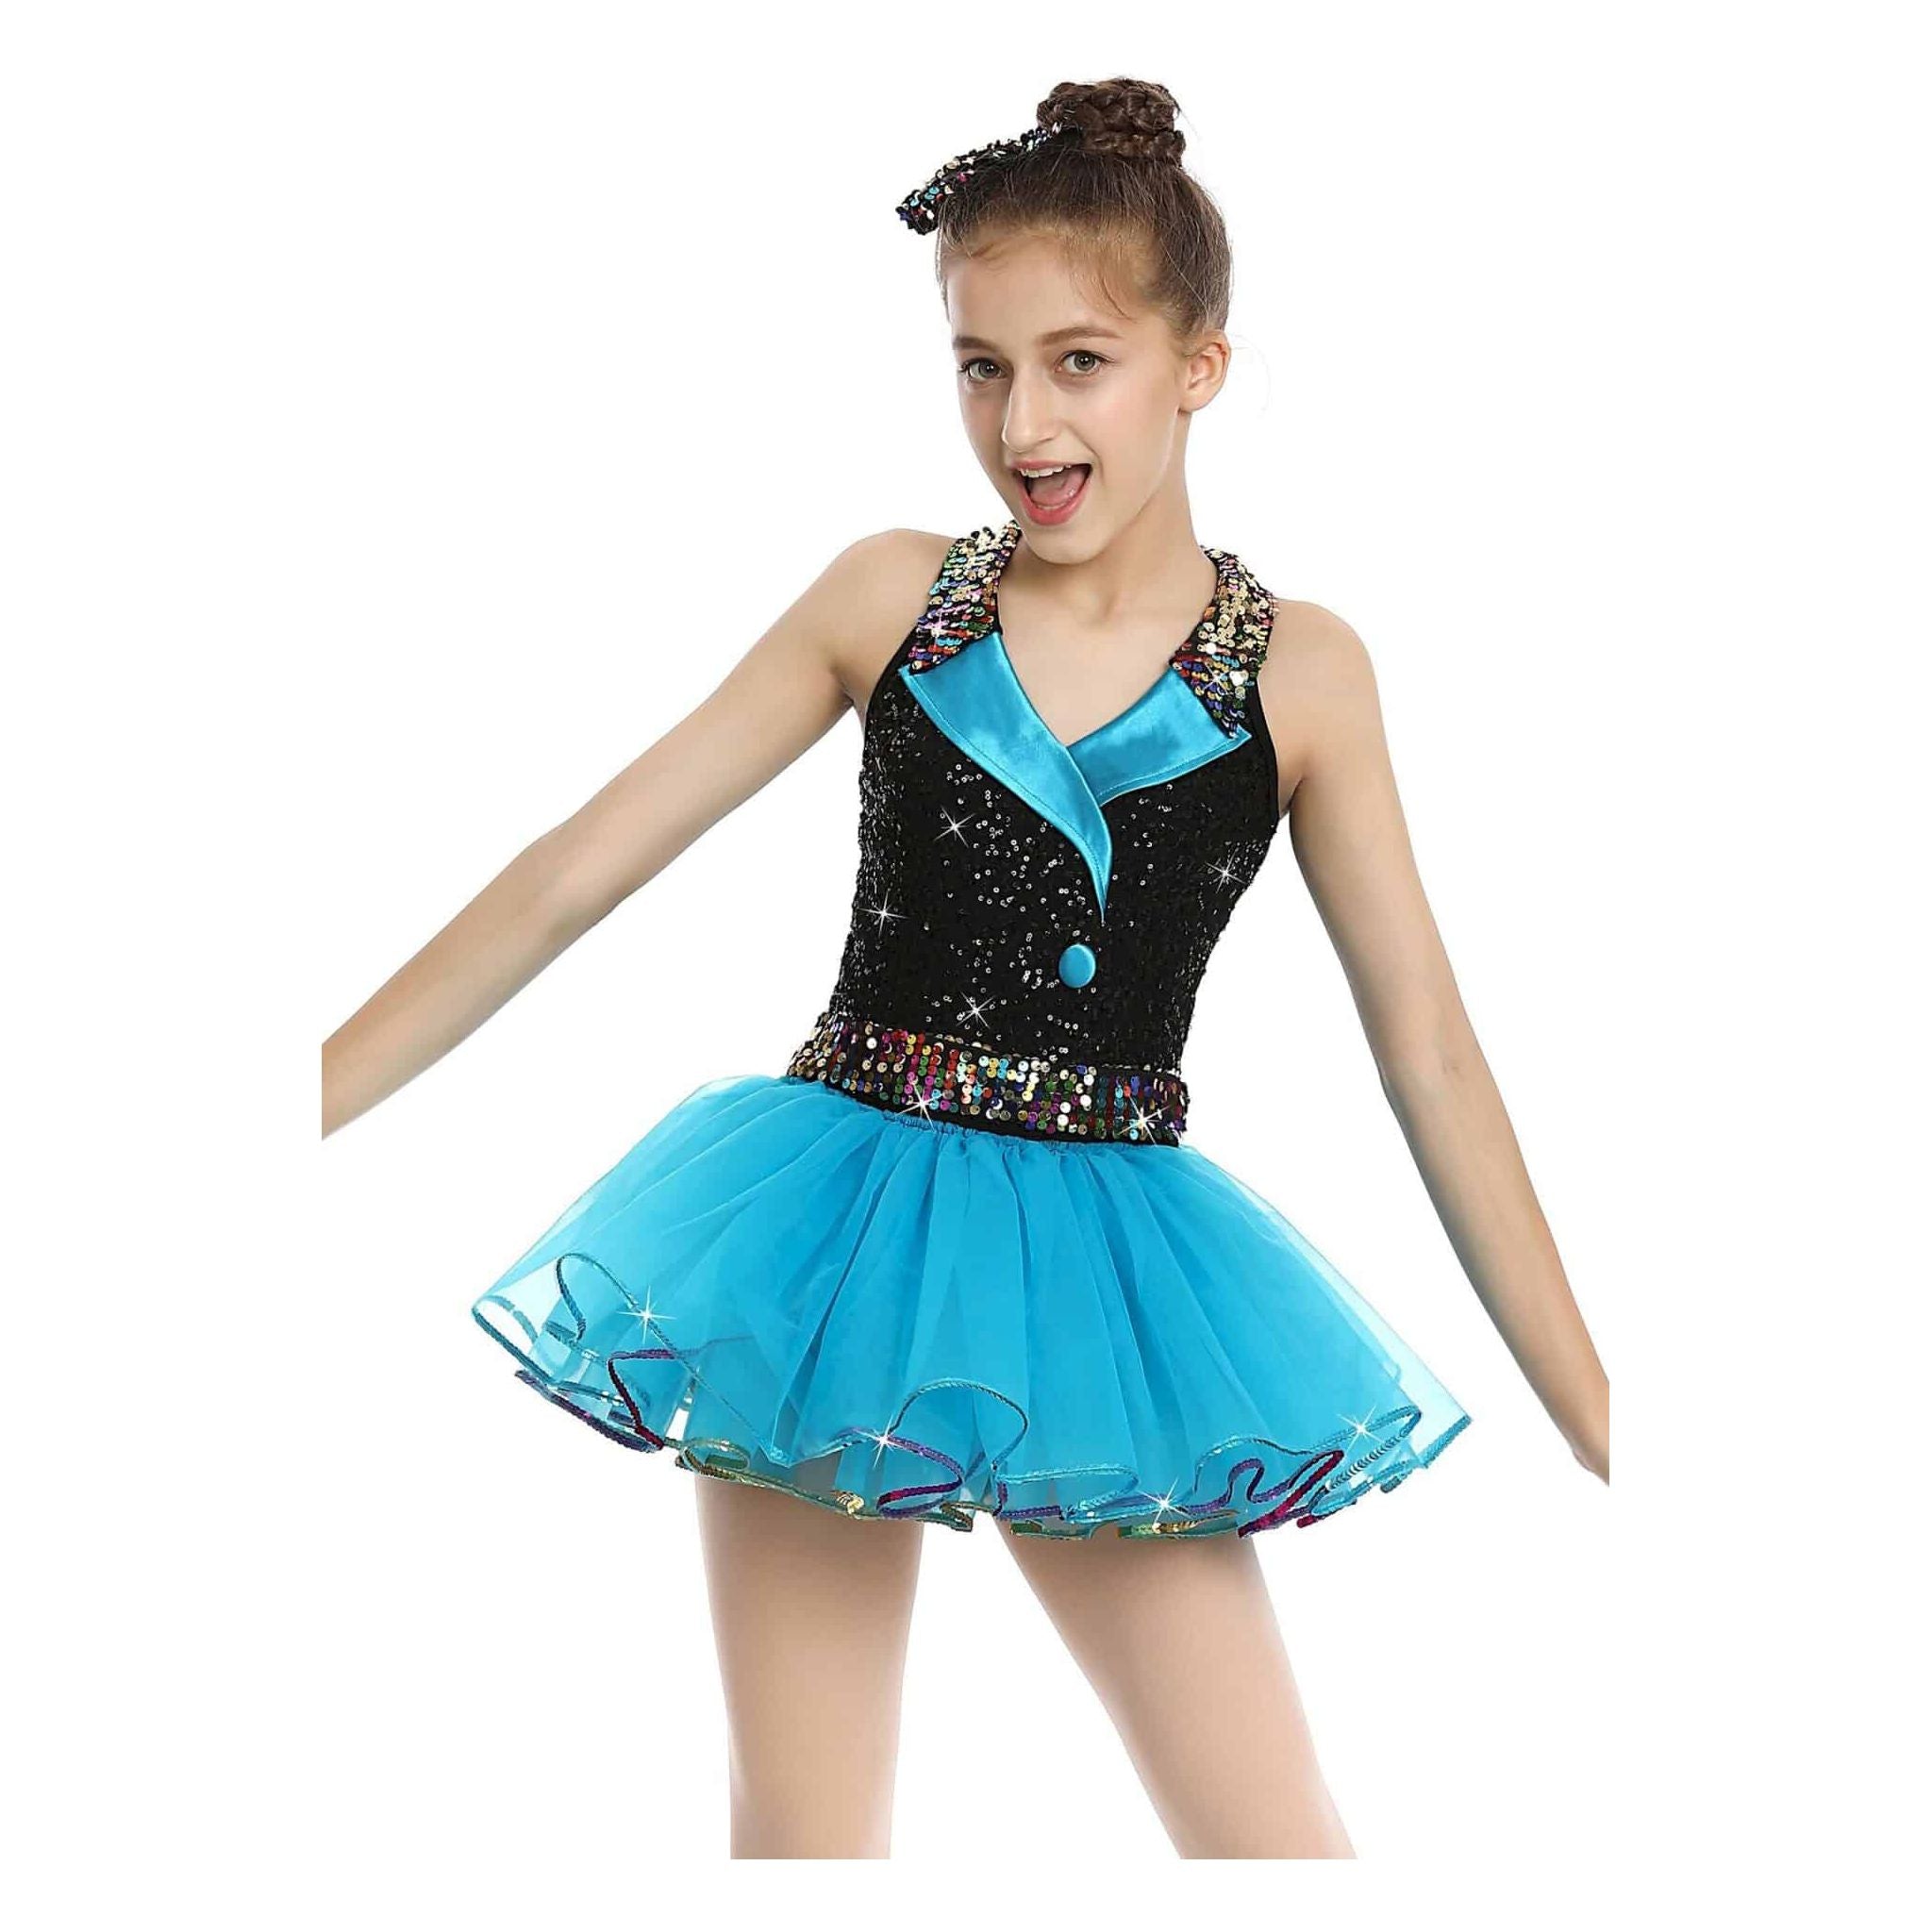 'Step Up' 2 in 1 Dance Costume